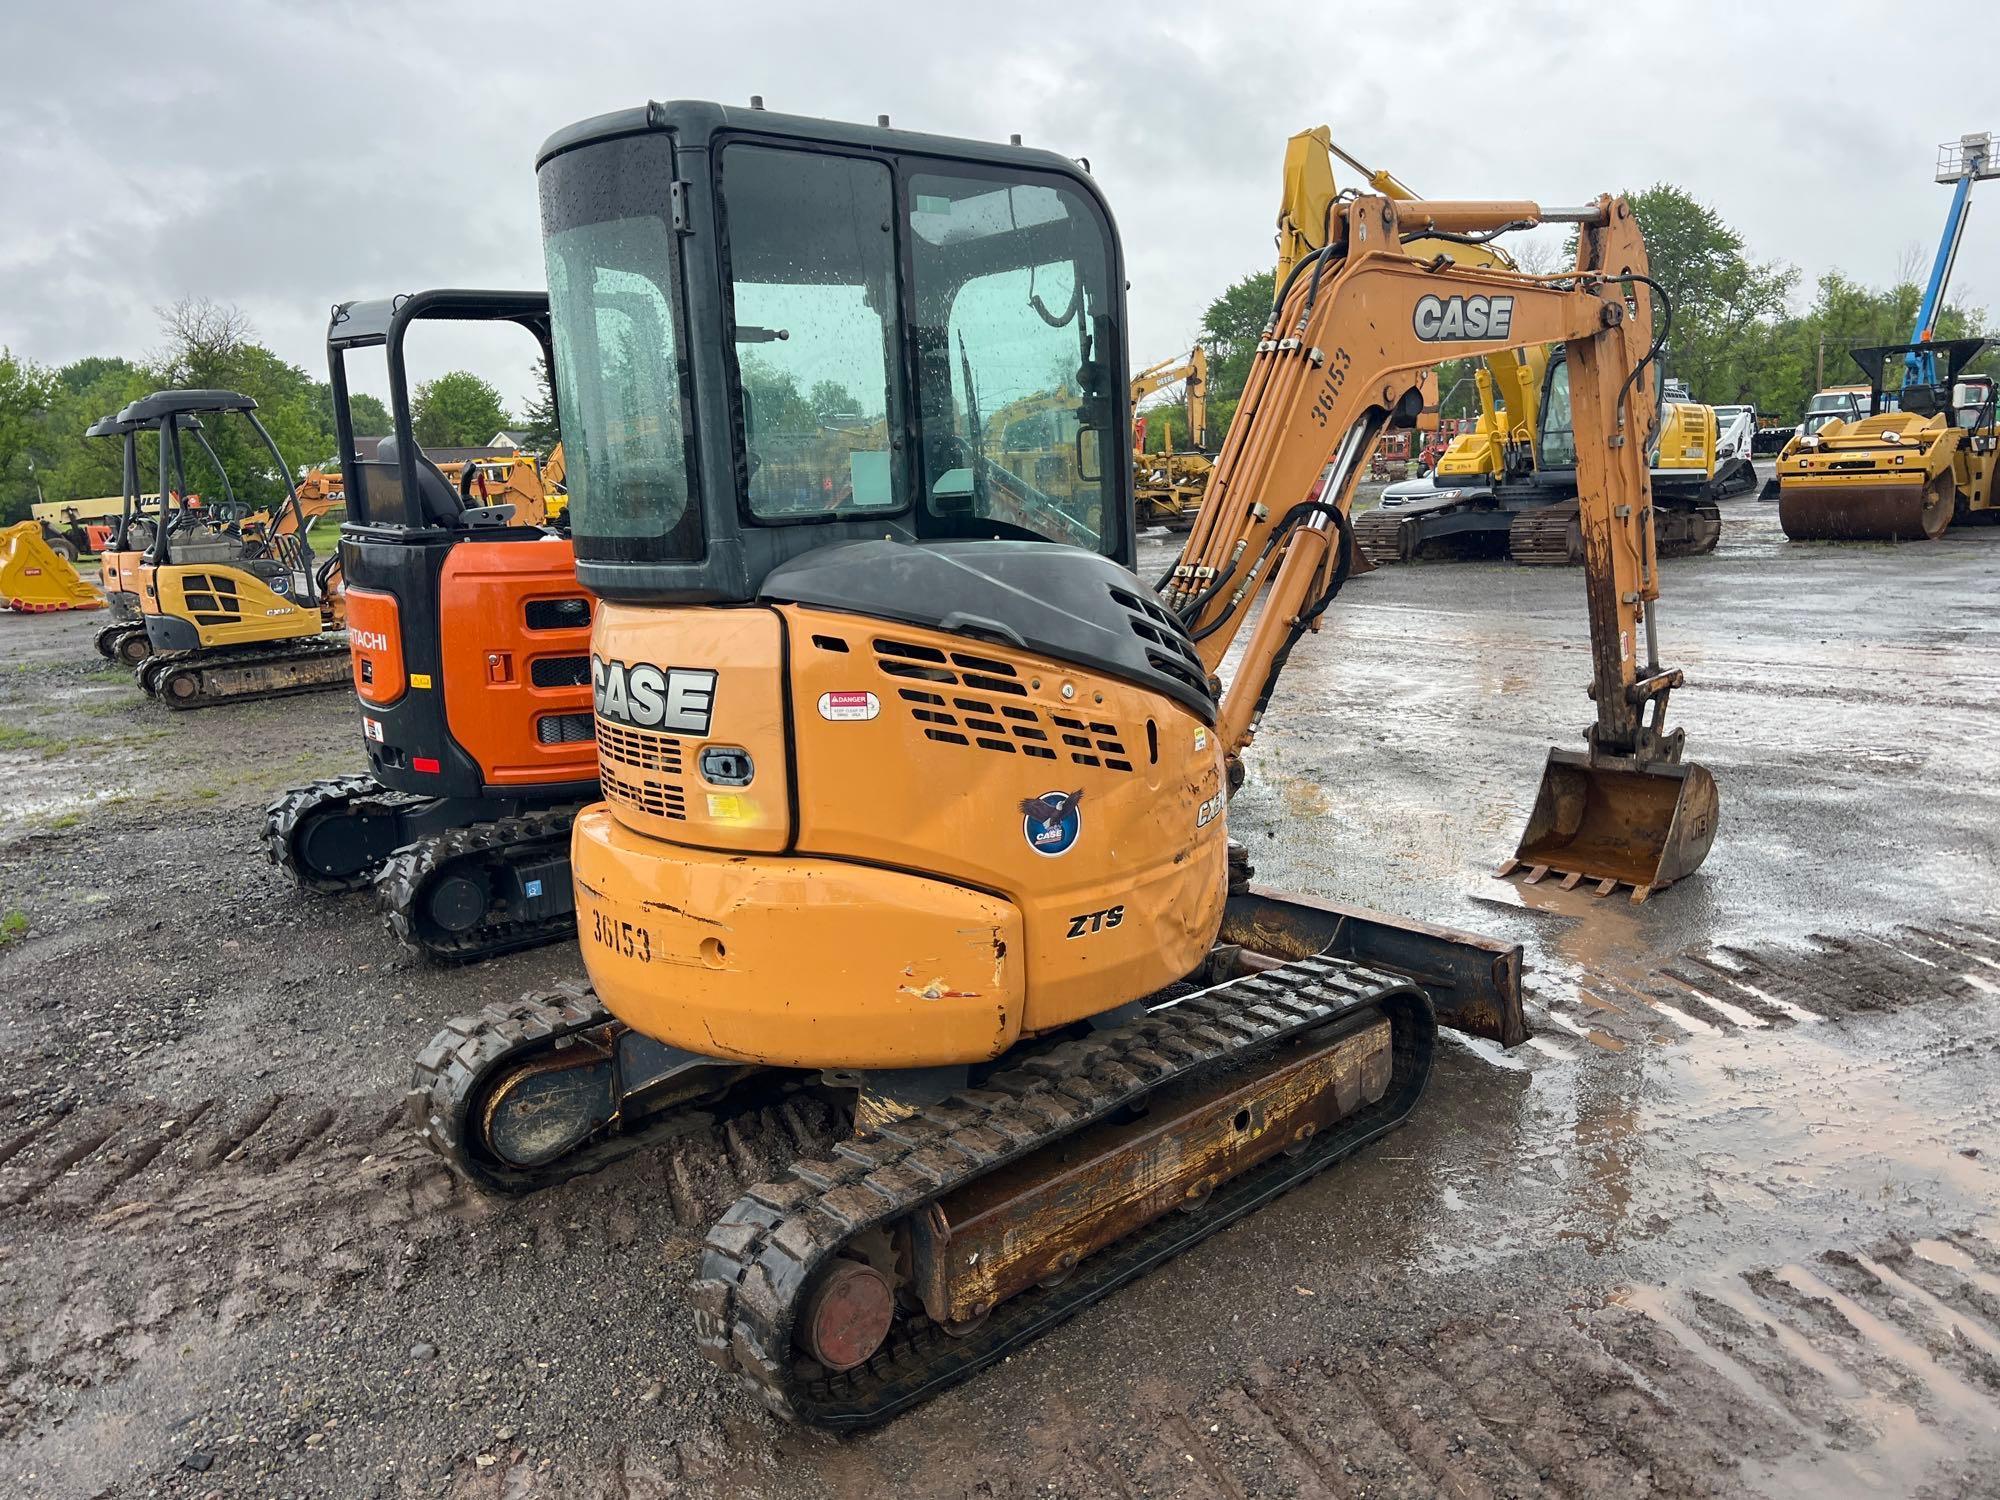 2012 CASE CX36B HYDRAULIC EXCAVATOR SN:NETN66153 powered by Yanmar diesel engine, equipped with Cab,